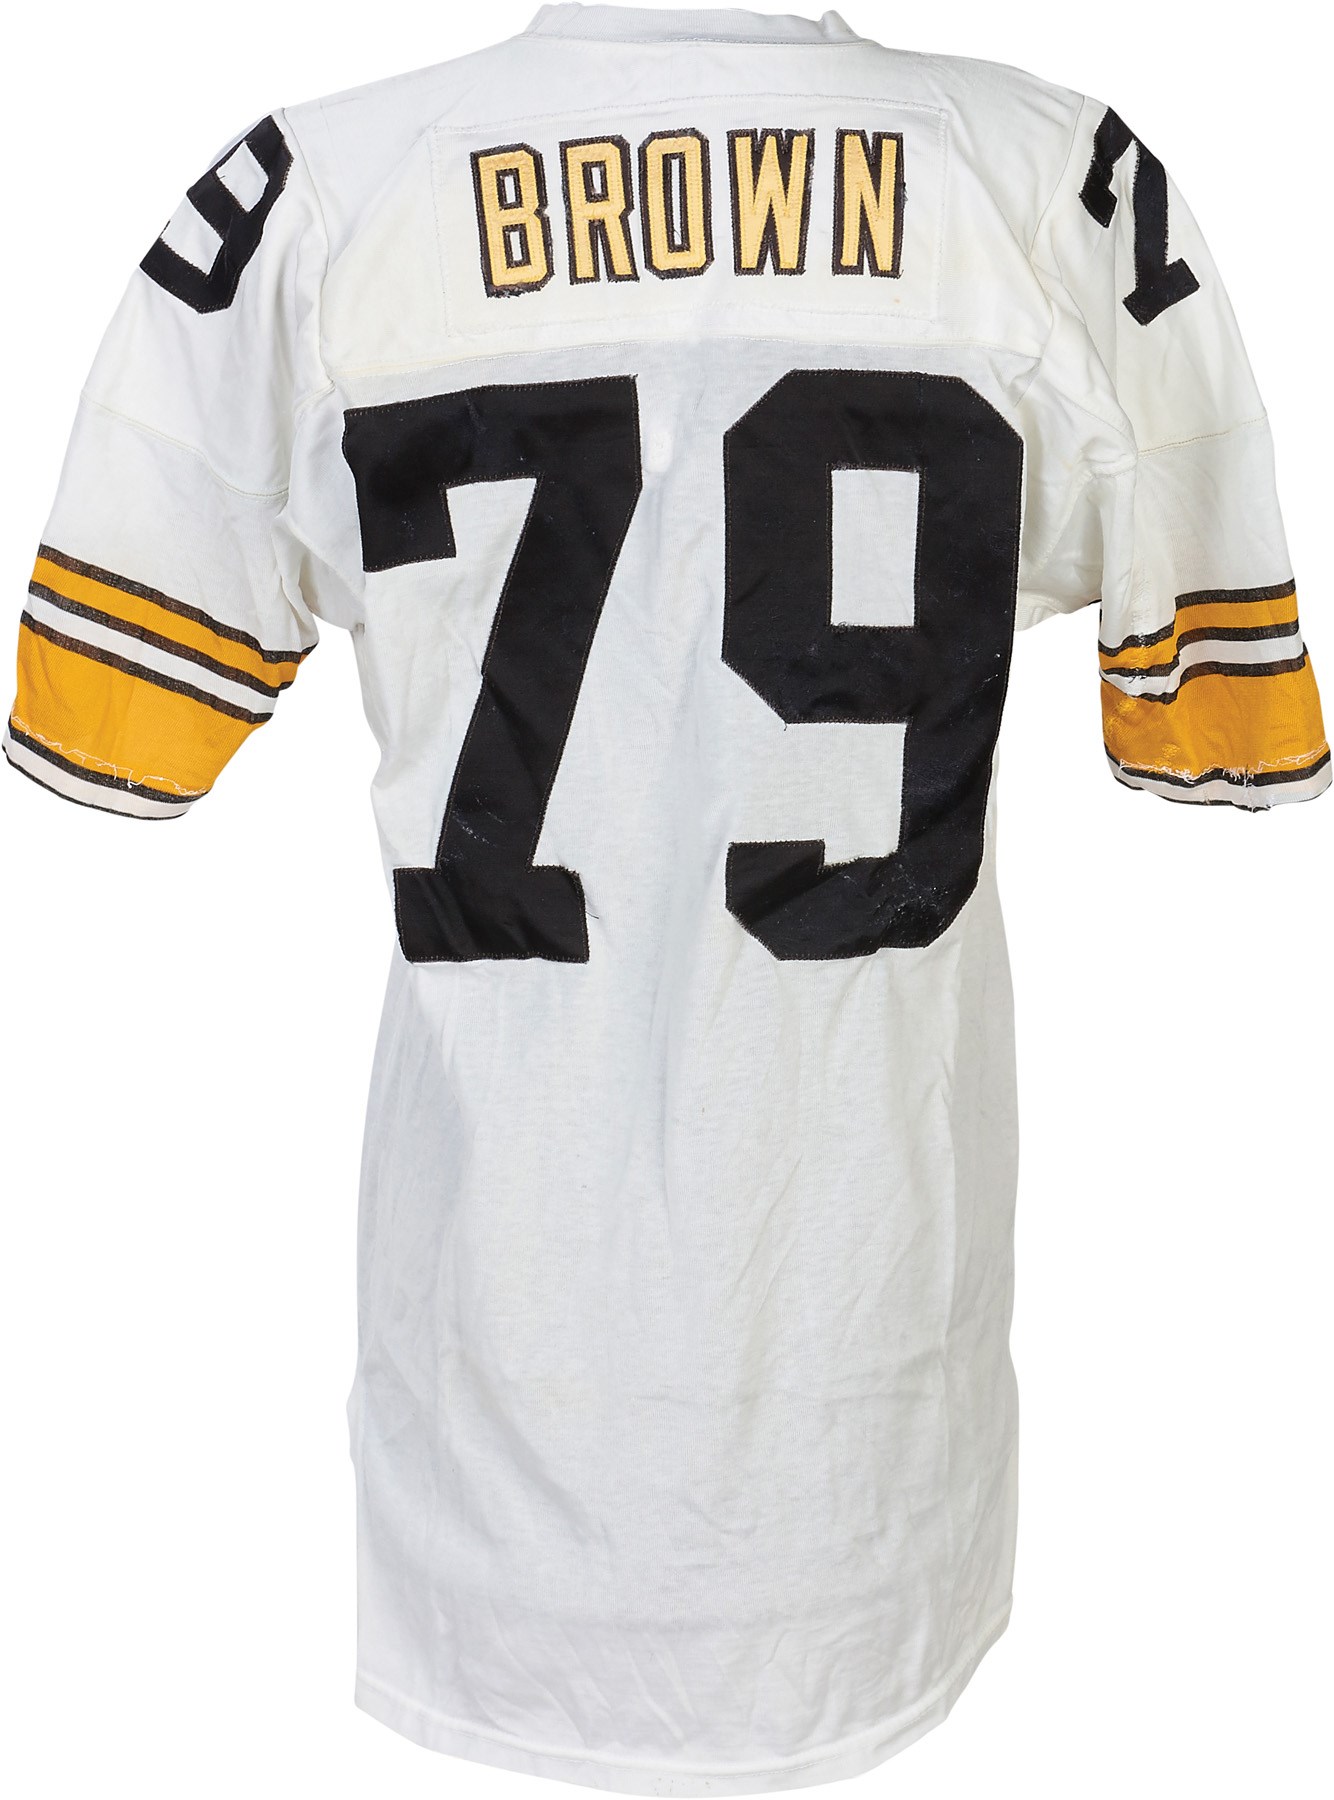 - 1981 Larry Brown Pittsburgh Steelers Game Worn Jersey